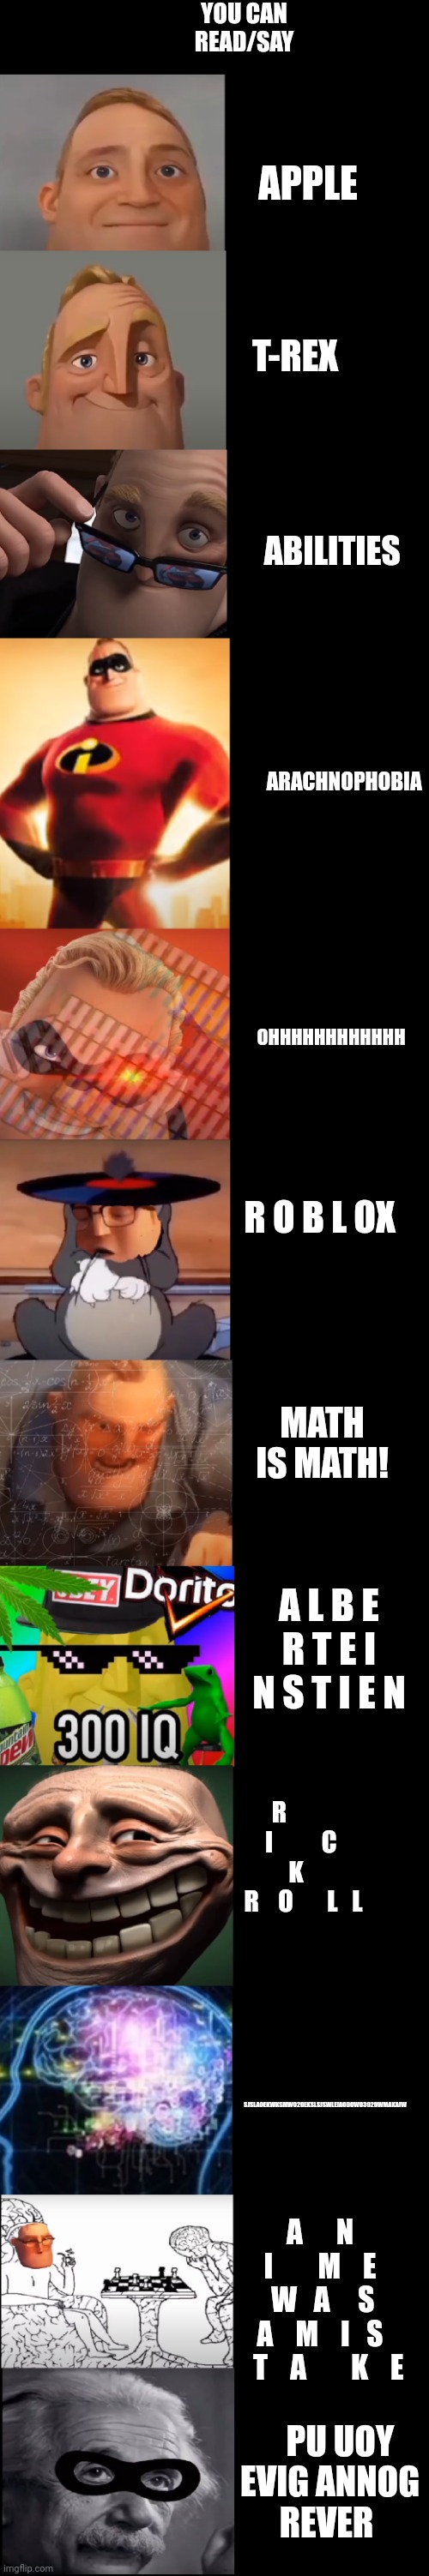 If you Can Read All Of This You Are A Genius :) | YOU CAN READ/SAY; APPLE; T-REX; ABILITIES; ARACHNOPHOBIA; OHHHHHHHHHHHH; R O B L OX; MATH IS MATH! A L B E R T E I N S T I E N; R           I          C      K        R    O       L   L; SJSLAOEKWKSMWO2OEKSLSJSWLEIAODOWO392OWMAKAIW; A      N    I        M    E     W   A     S    A    M    I   S    T    A        K    E; PU UOY EVIG ANNOG 
REVER | image tagged in quiz | made w/ Imgflip meme maker